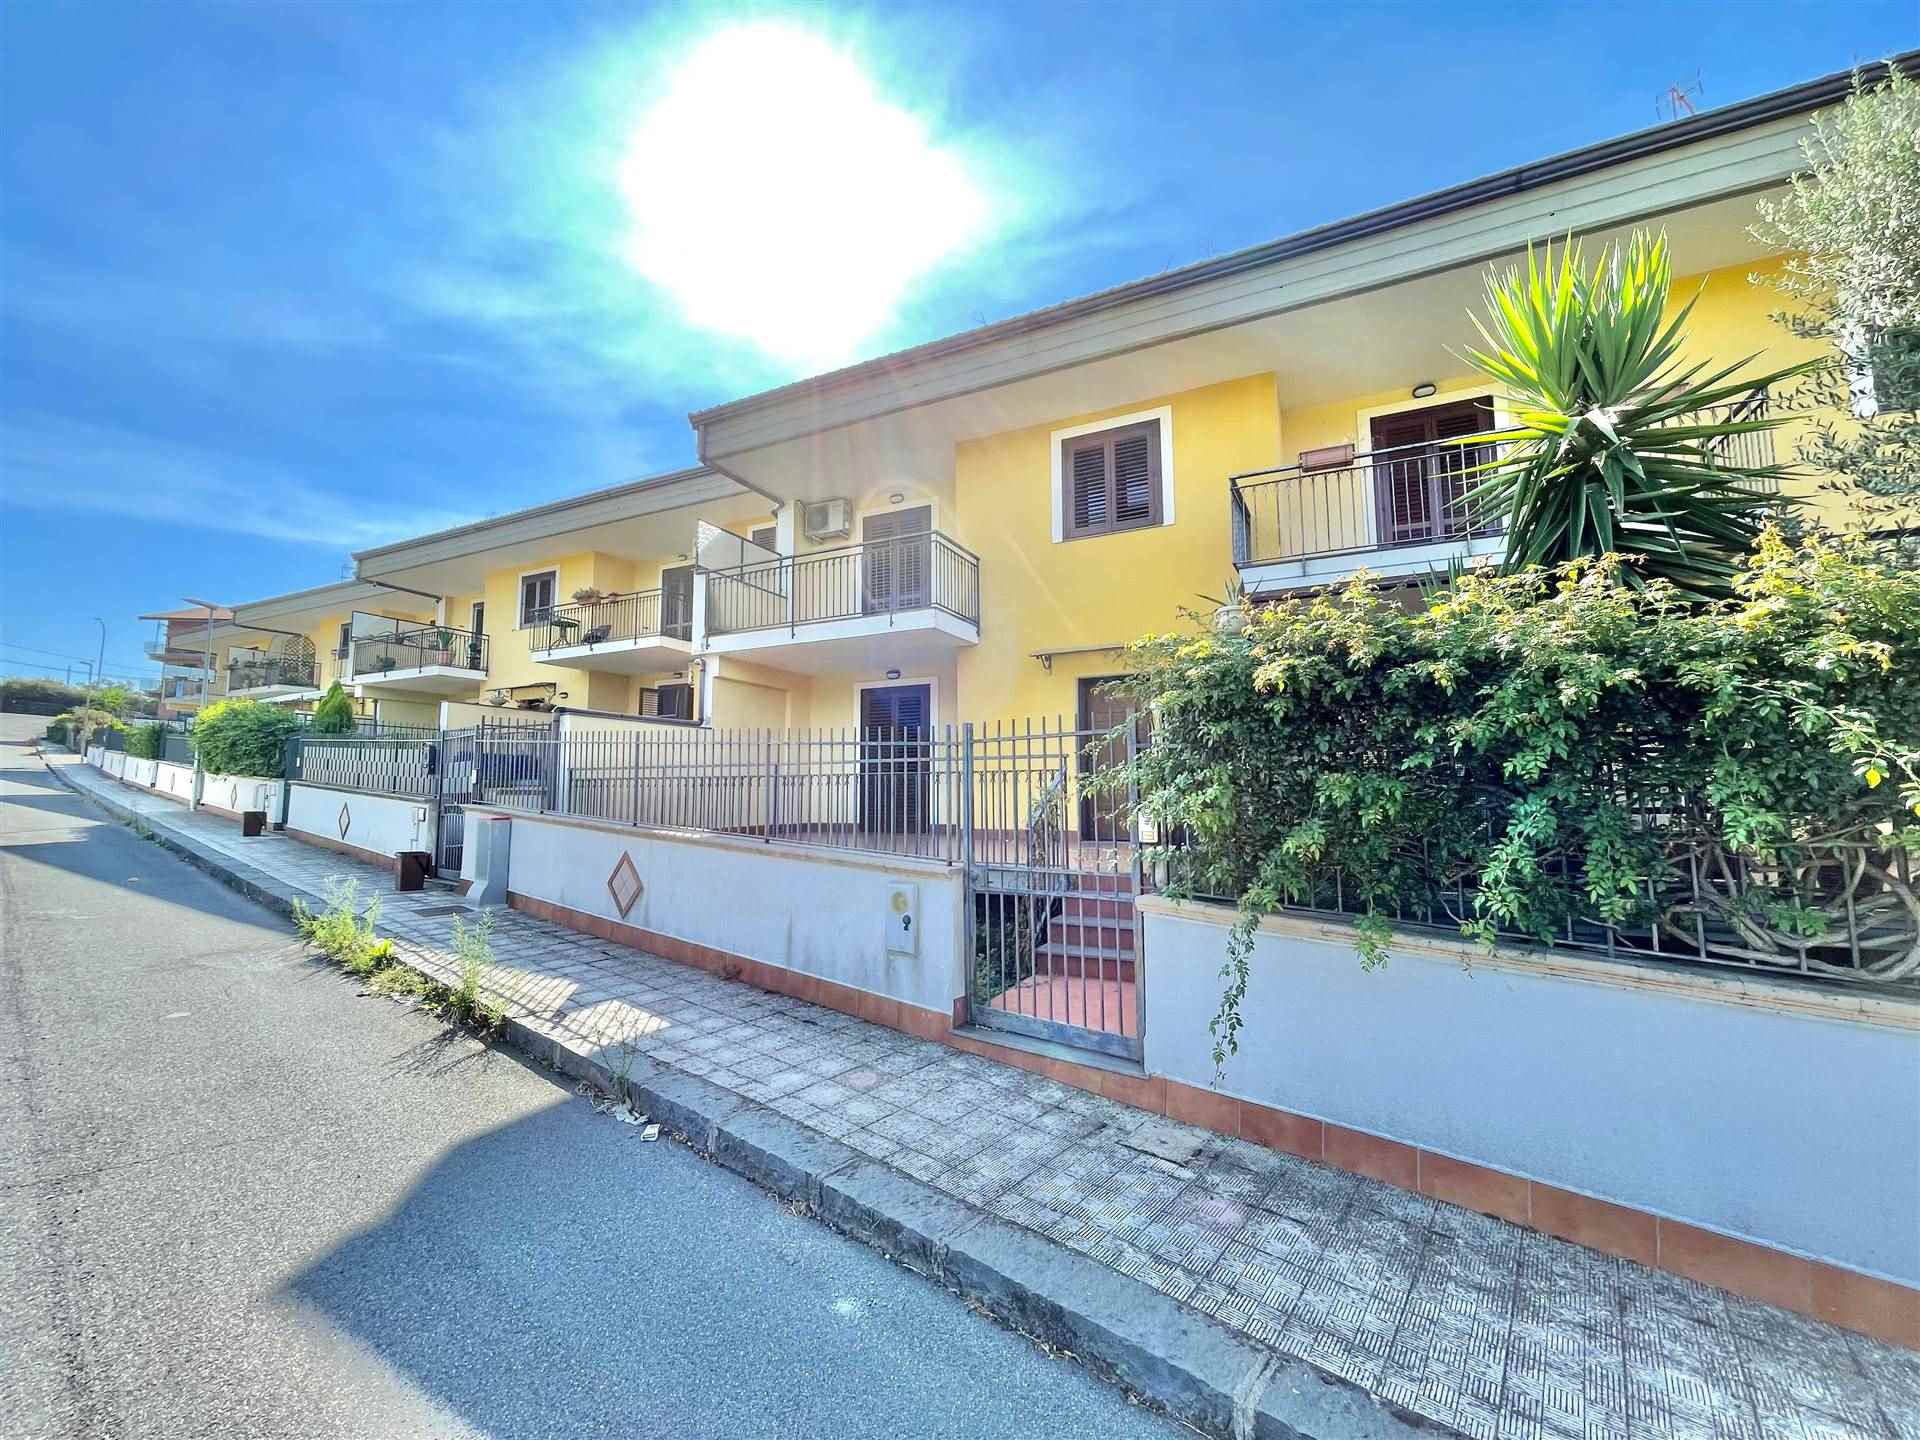 BELPASSO, Terraced villa for sale of 242 Sq. mt., Almost new, Heating Individual heating system, Energetic class: E, placed at Ground on 4, composed 